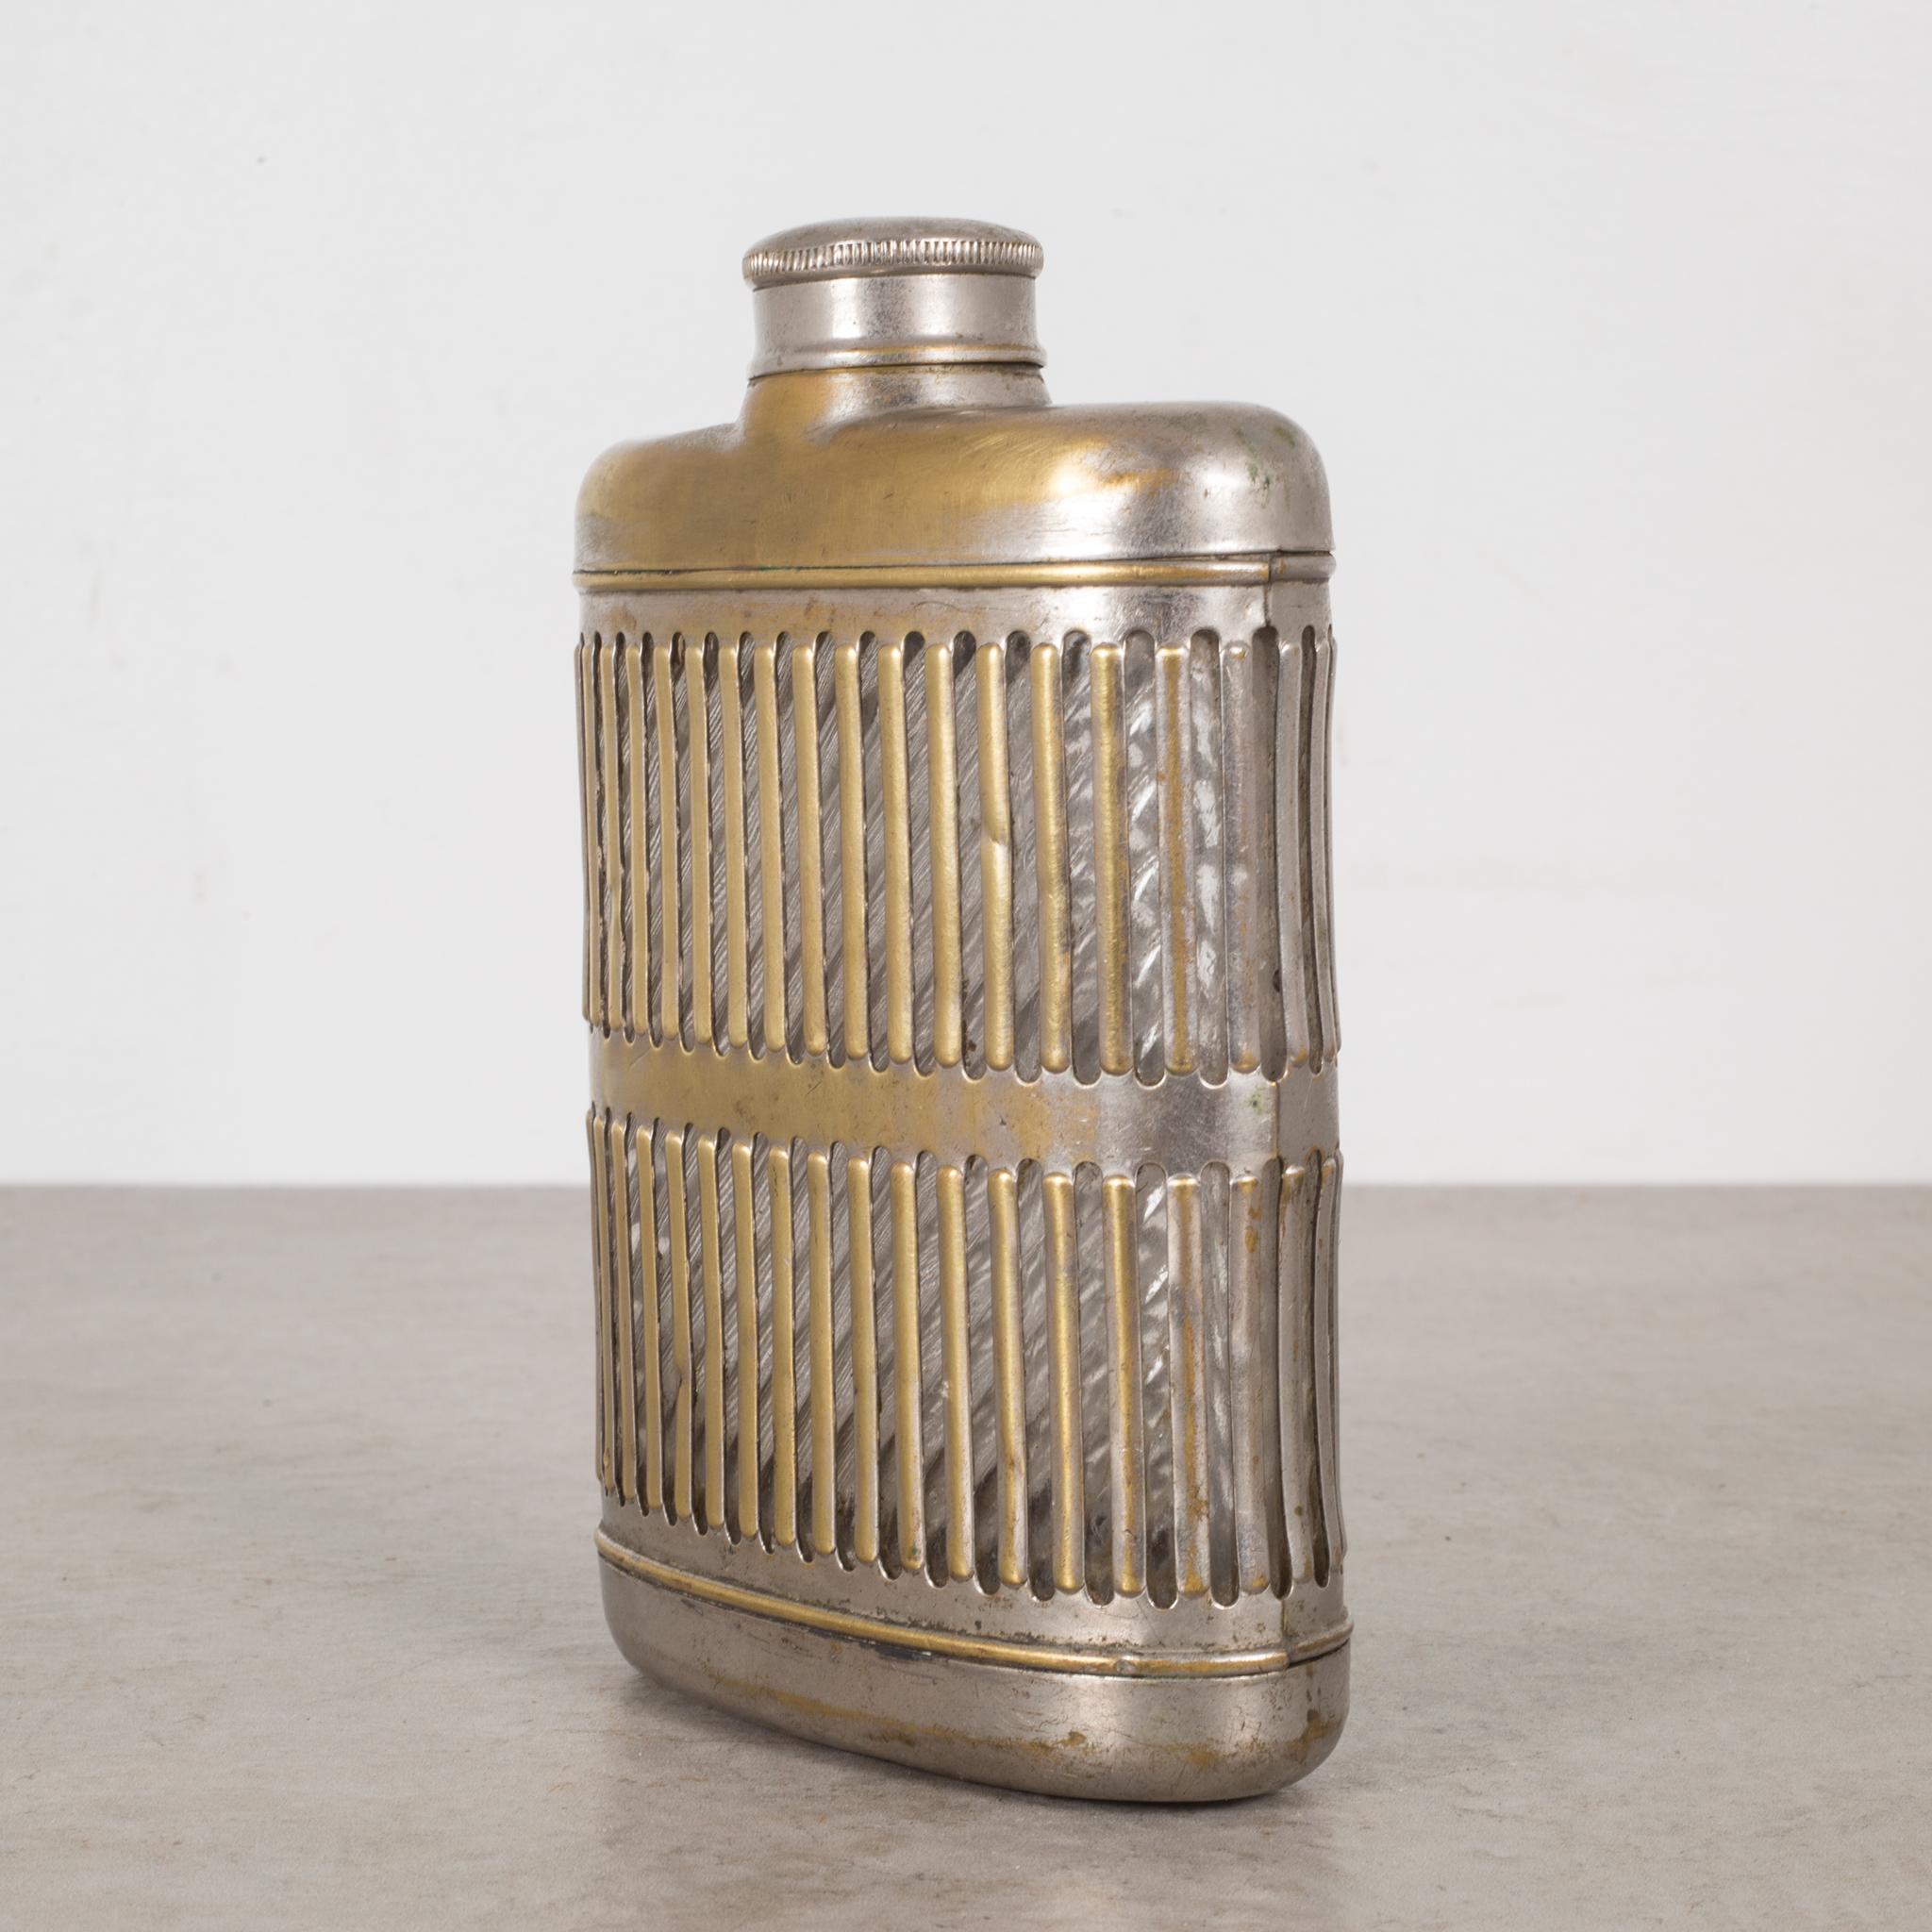 ABOUT

A brass plated caged metal flask with screw top lid and glass interior.

 CREATOR Unknown.
 DATE OF MANUFACTURE c.1920.
 MATERIALS AND TECHNIQUES Brass Plated Metal, Glass.
 CONDITION Good. Wear consistent with age and use. Glass is